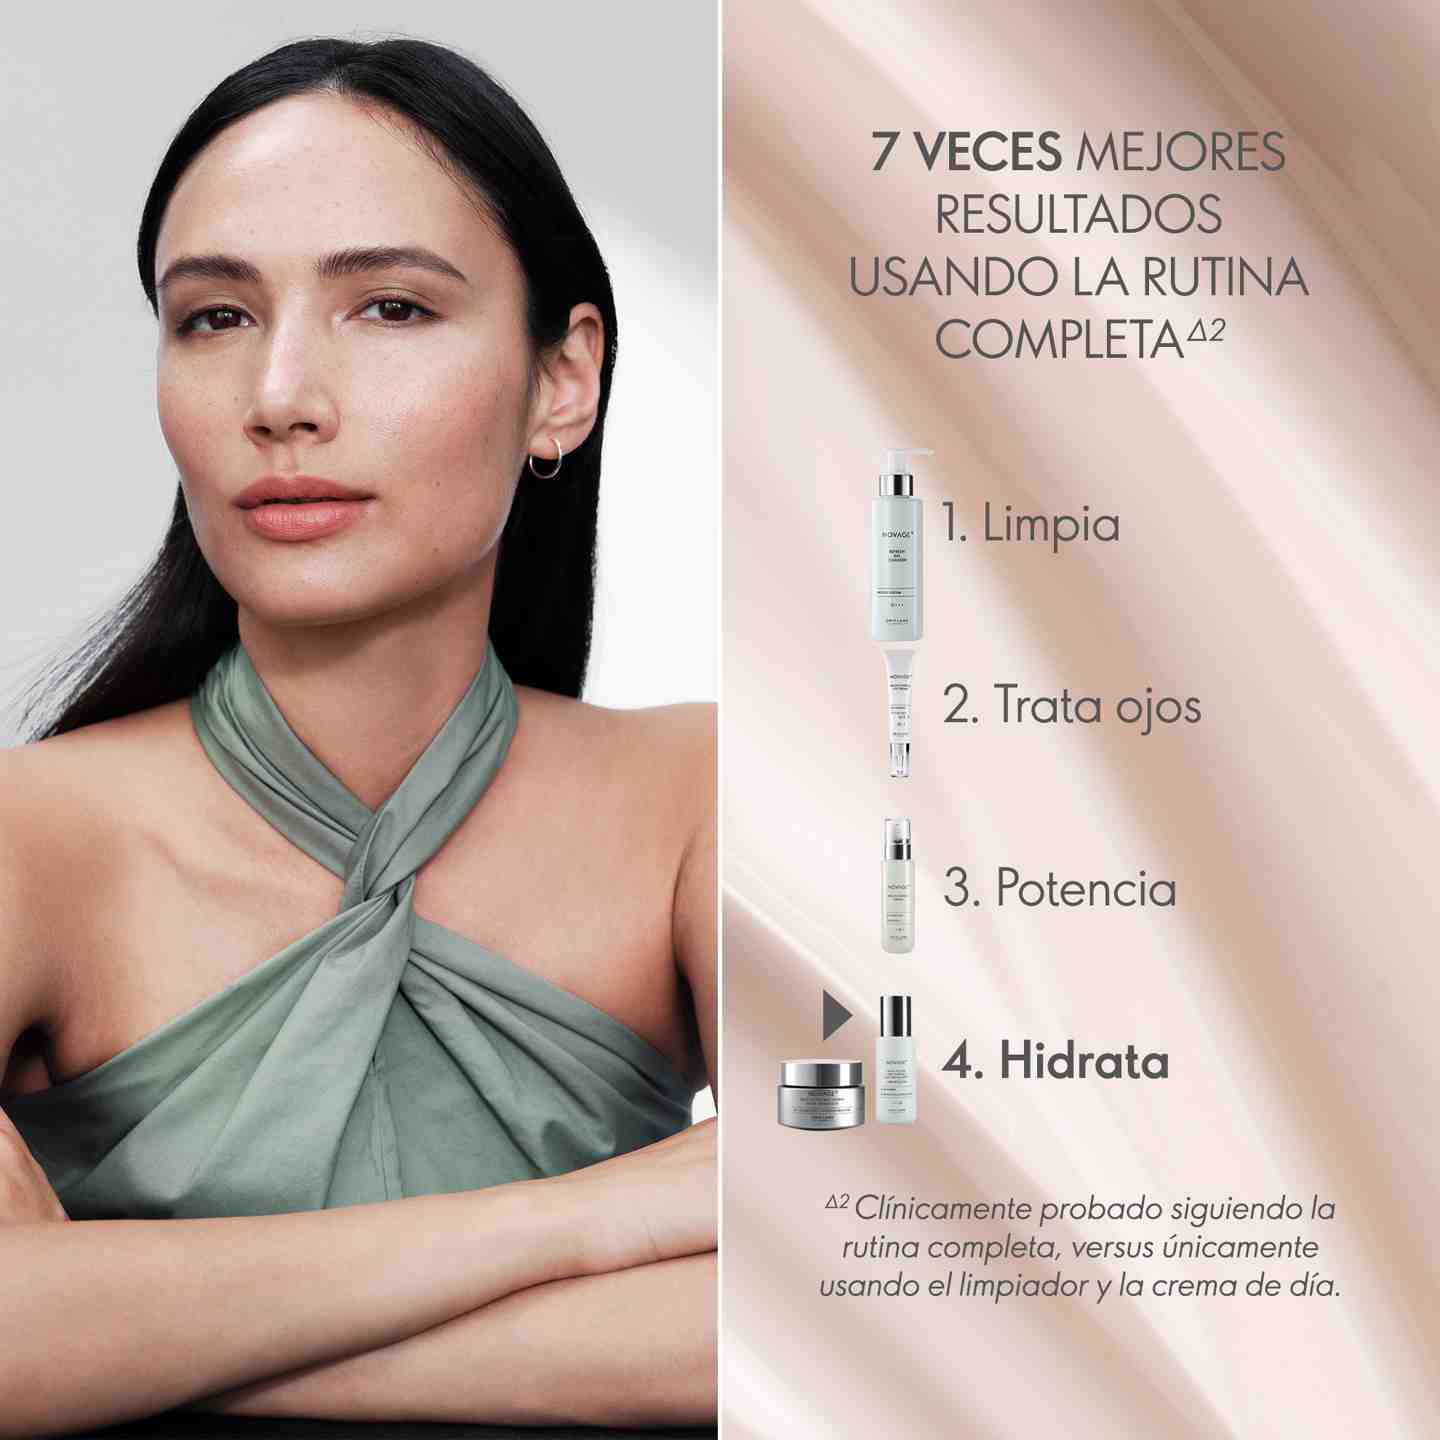 https://media-cdn.oriflame.com/productImage?externalMediaId=product-management-media%2fProducts%2f41057%2fMX%2f41057_3.png&id=18234952&version=1